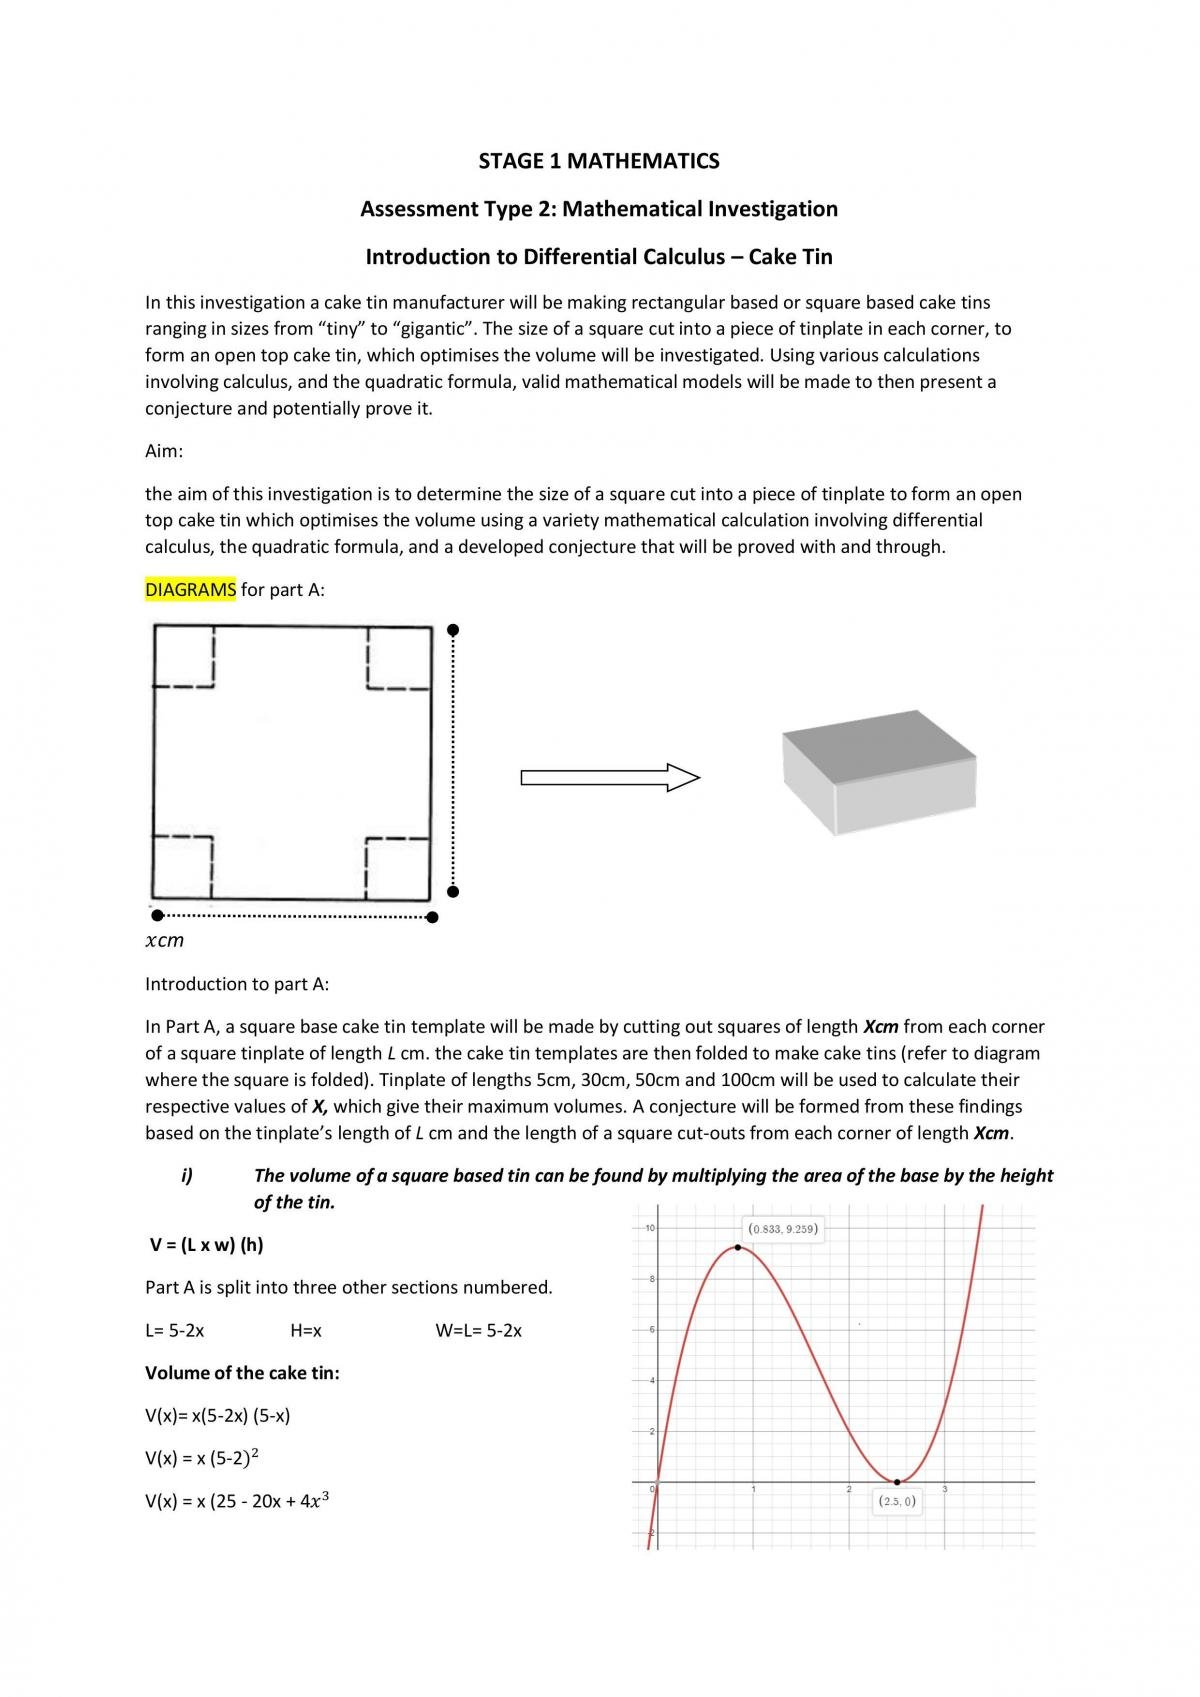 Introduction to Differential Calculus - Cake Tin Investigation - Page 1